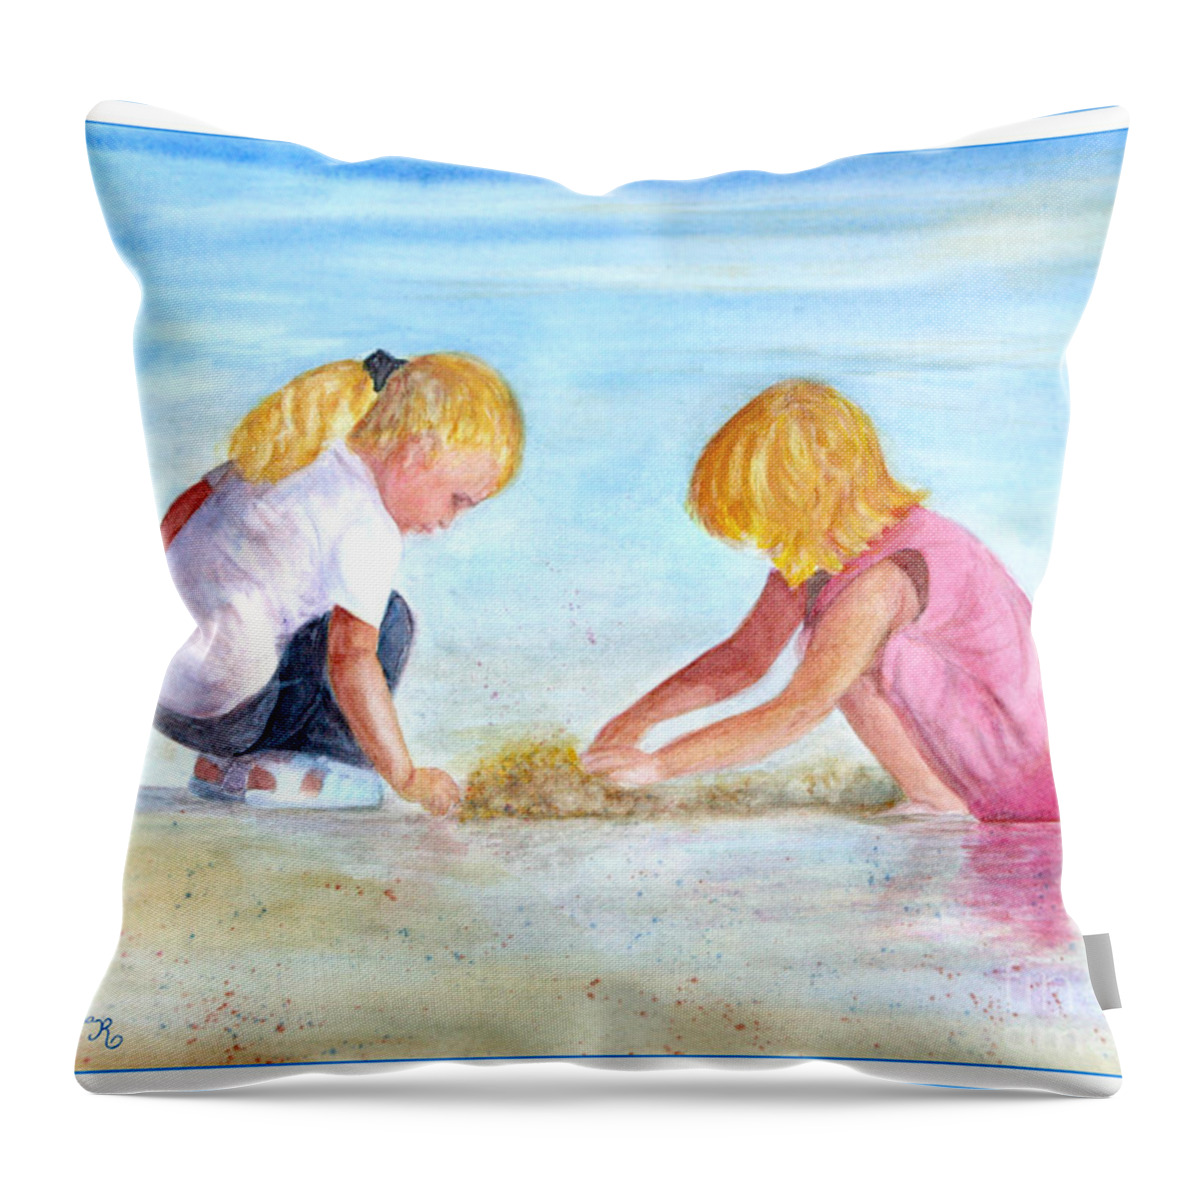 Water Throw Pillow featuring the painting Innocence by Mariarosa Rockefeller